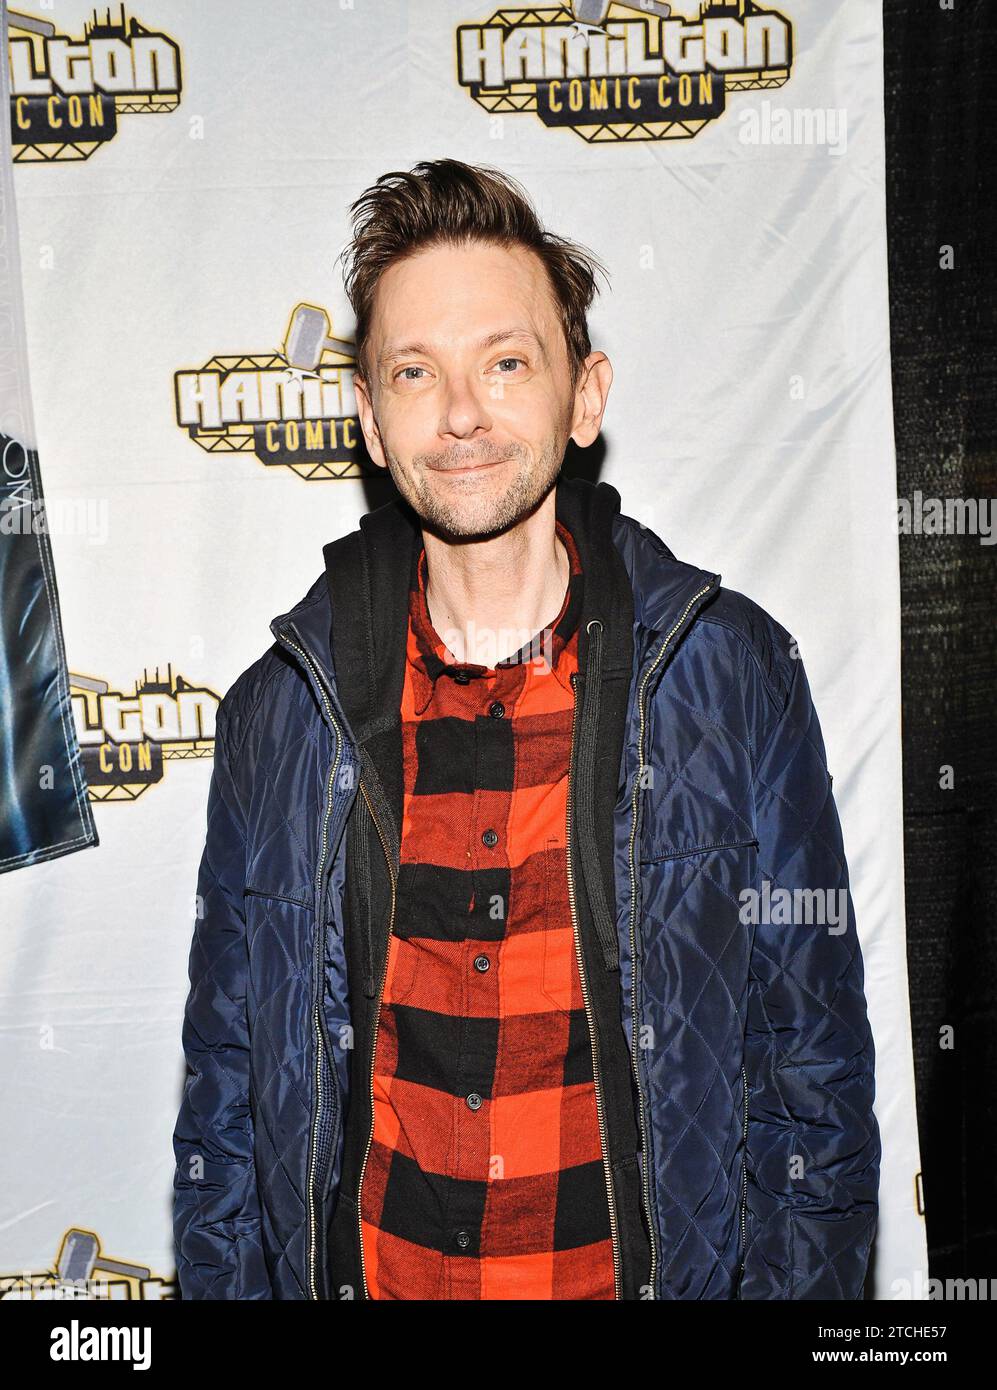 https://c8.alamy.com/comp/2TCHE57/23-october-2023-hamilton-ontario-canada-actor-dj-qualls-best-known-for-his-roles-in-road-trip-and-the-new-guy-at-hamilton-comic-con-at-the-canadian-warplane-heritage-museum-credit-image-brent-perniacadmedia-via-zuma-press-wire-editorial-usage-only!-not-for-commercial-usage!-2TCHE57.jpg